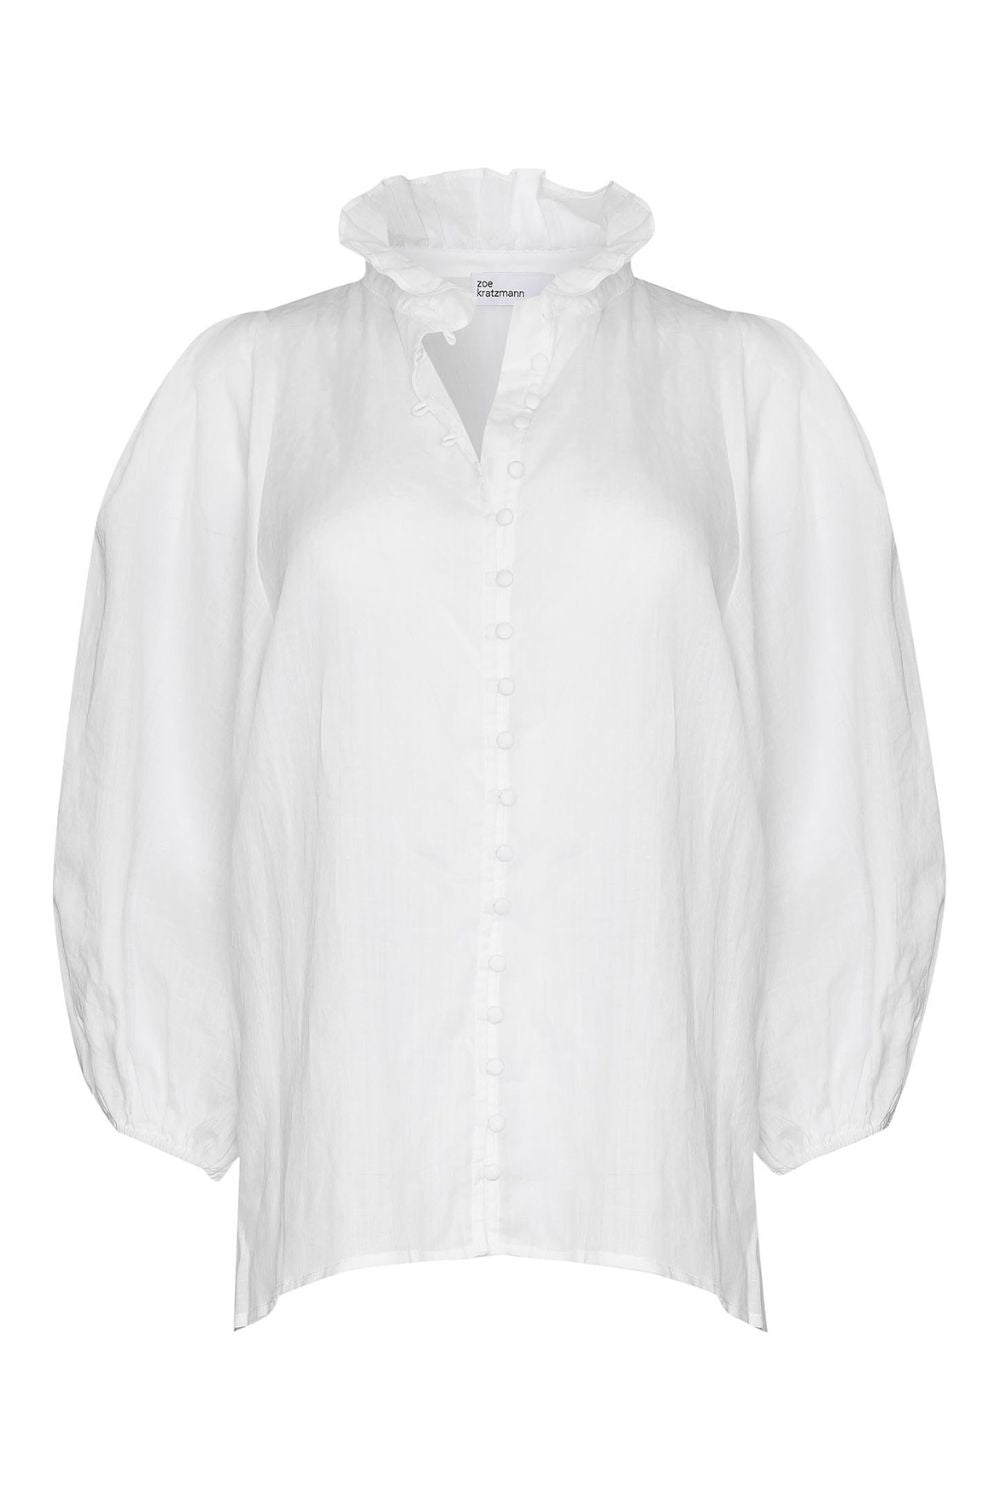 white, ruffle neck collar, buttons down centre, mid length sleeve, shirt, product image